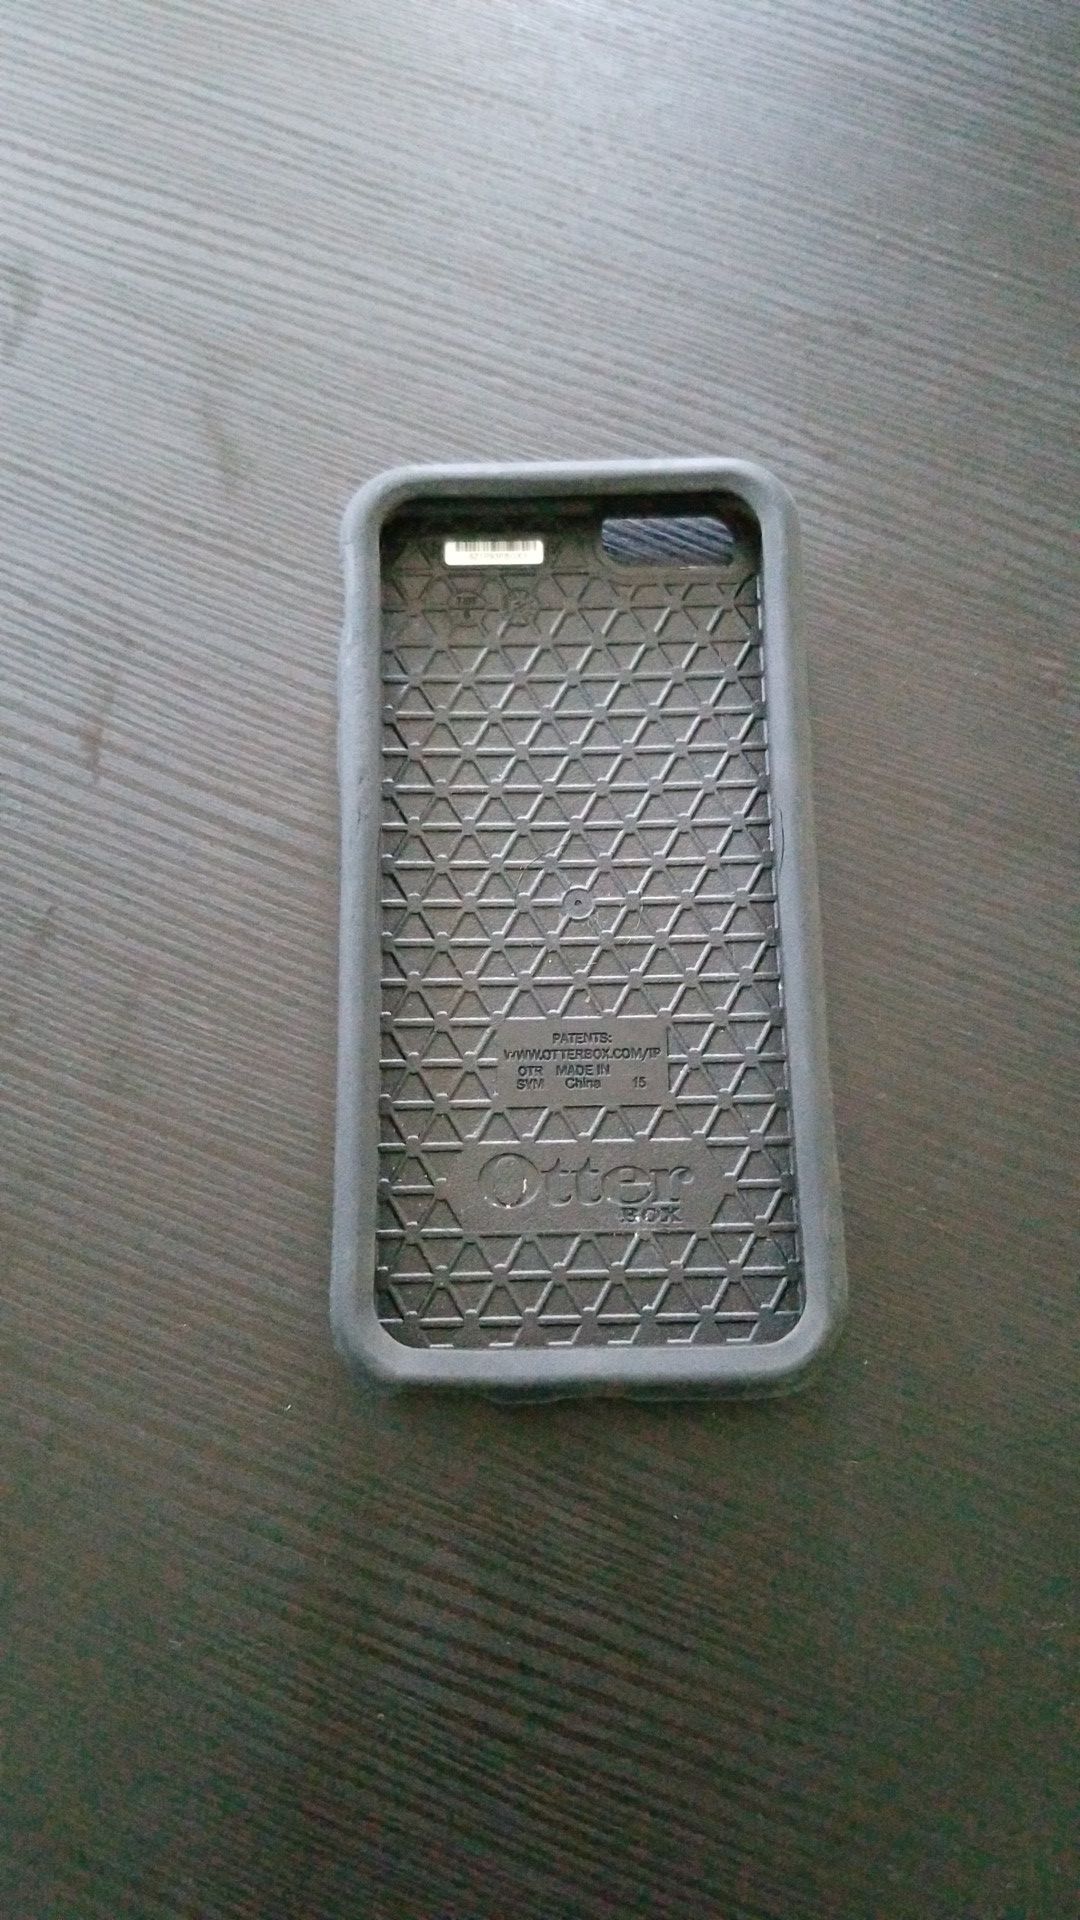 Otter box for iPhone